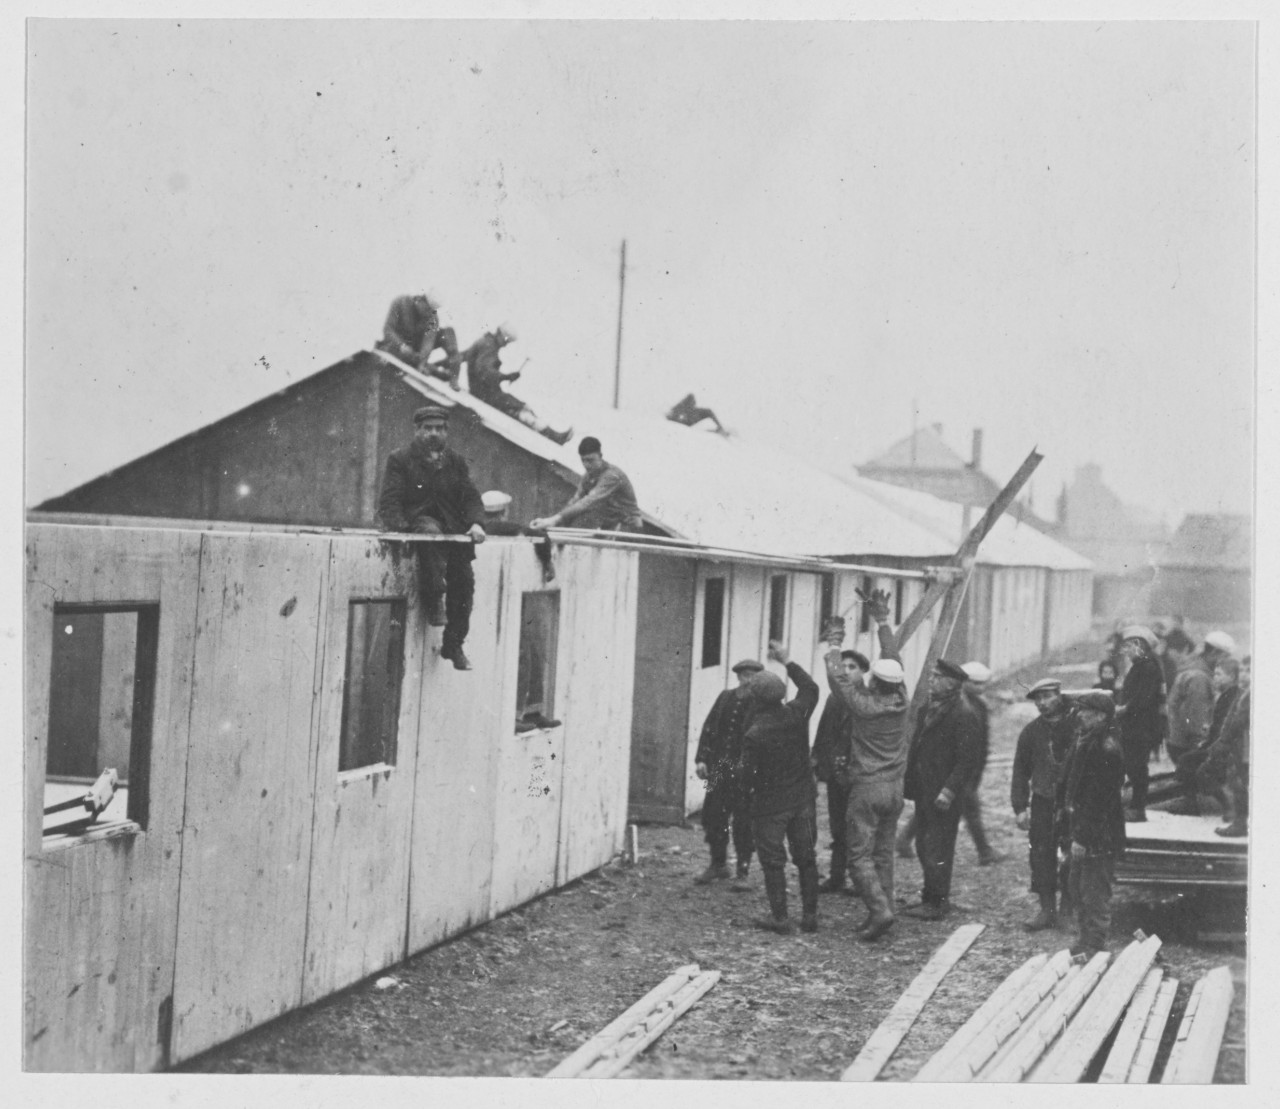 Navy relief work near Lille, France during World War I. Men constructing building and building roof